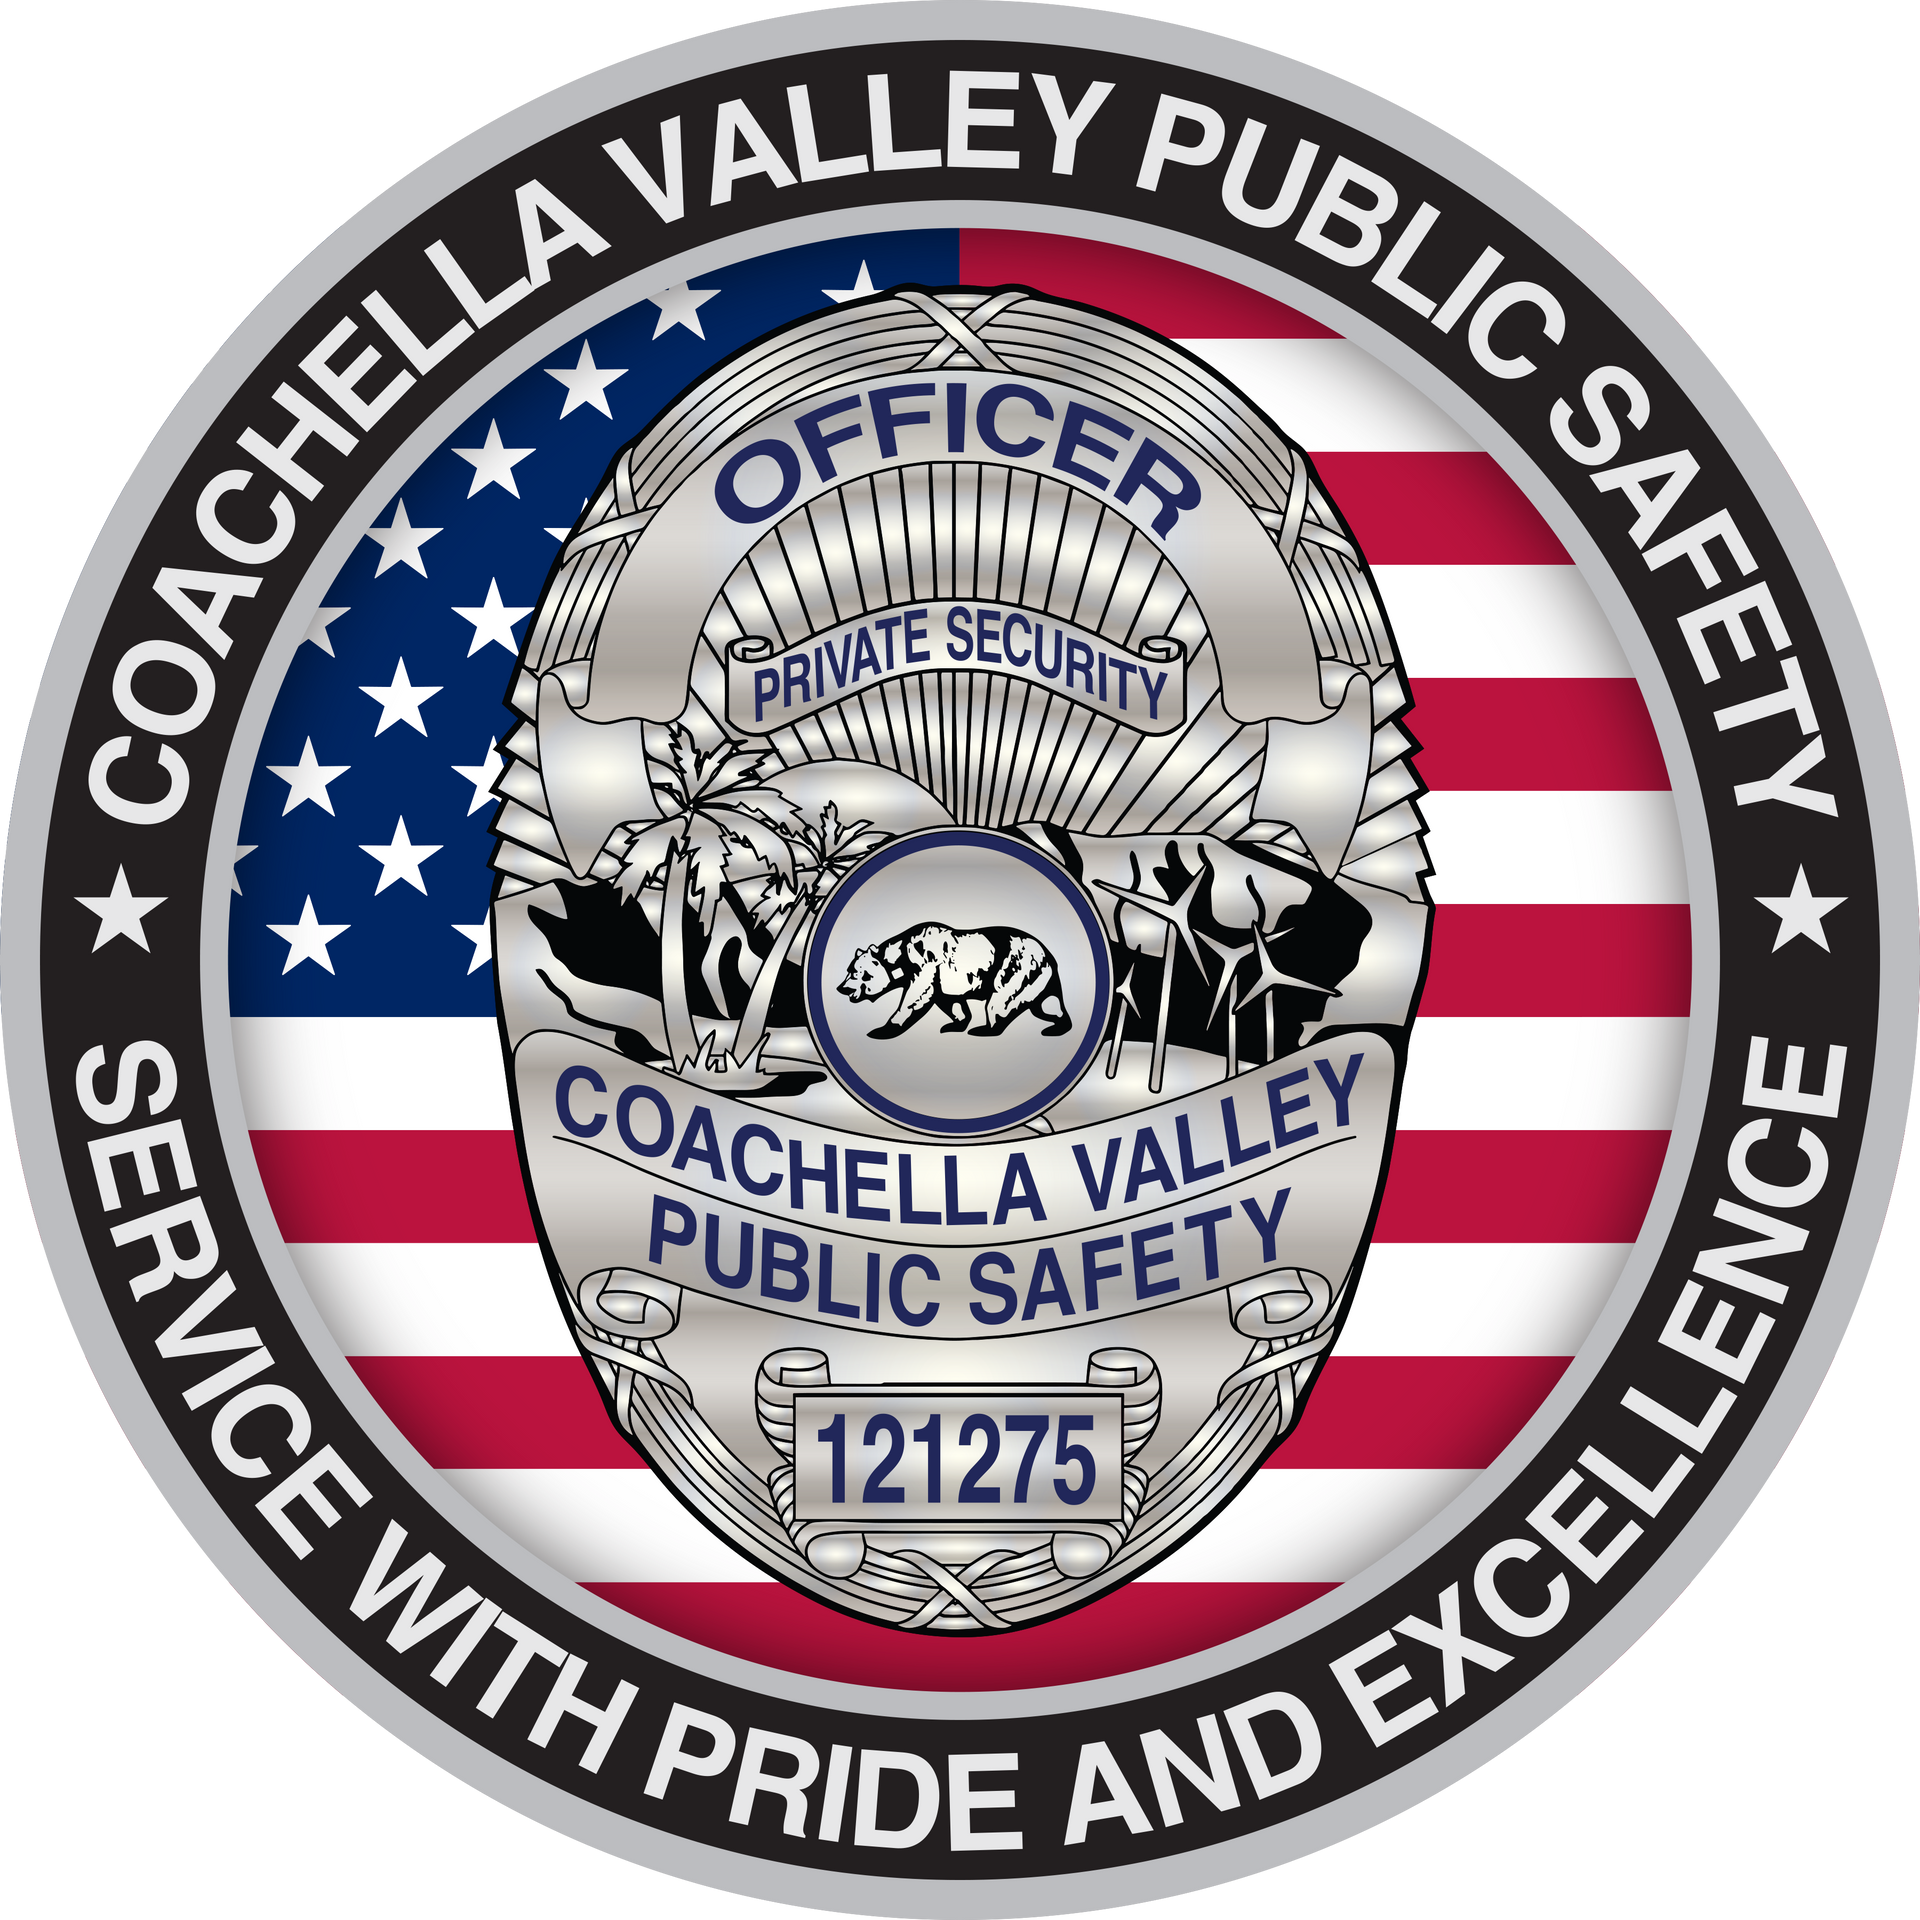 A blue and white logo for coachella valley public safety